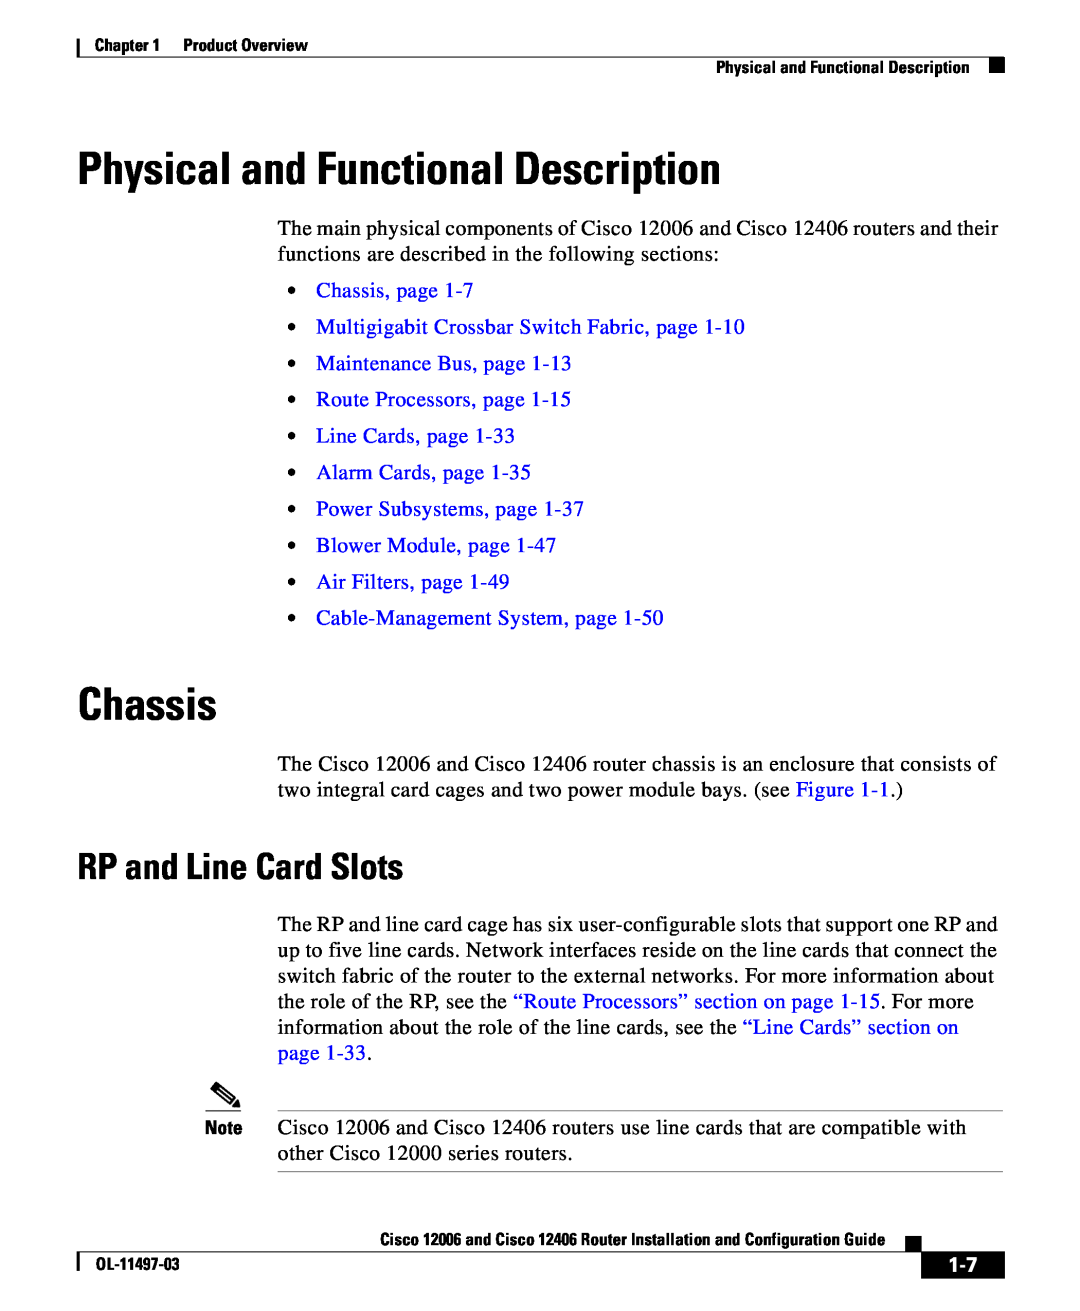 Cisco Systems 12006 series, 12406 series manual Physical and Functional Description, Chassis, RP and Line Card Slots 